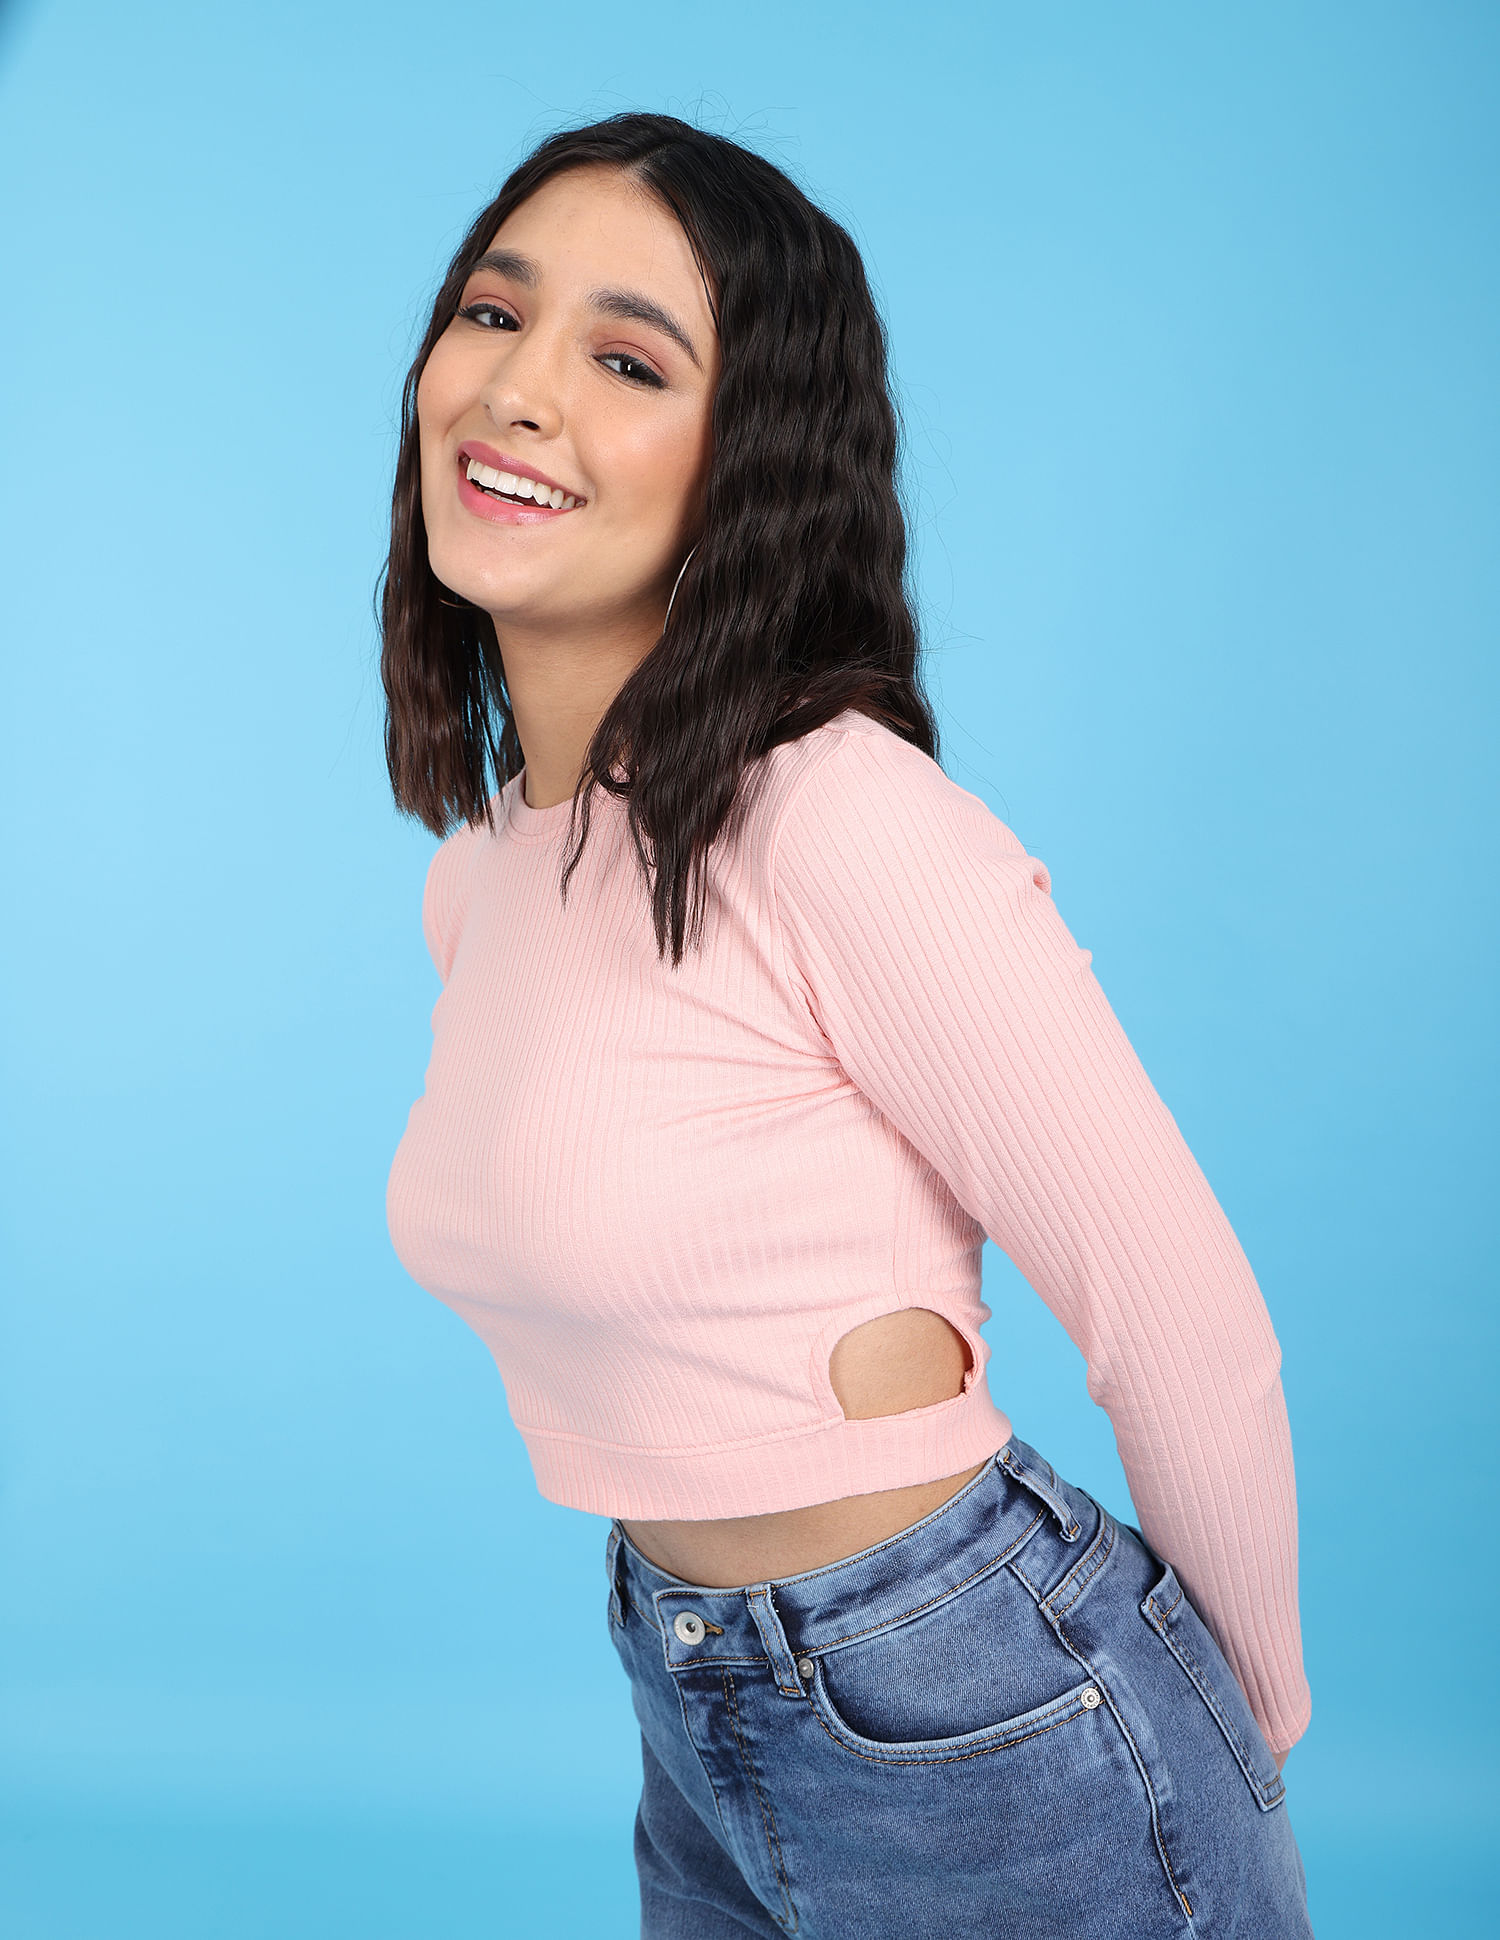 Buy Stylish Crop Tops for Women & Ladies from Online Shop in India - NNNOW